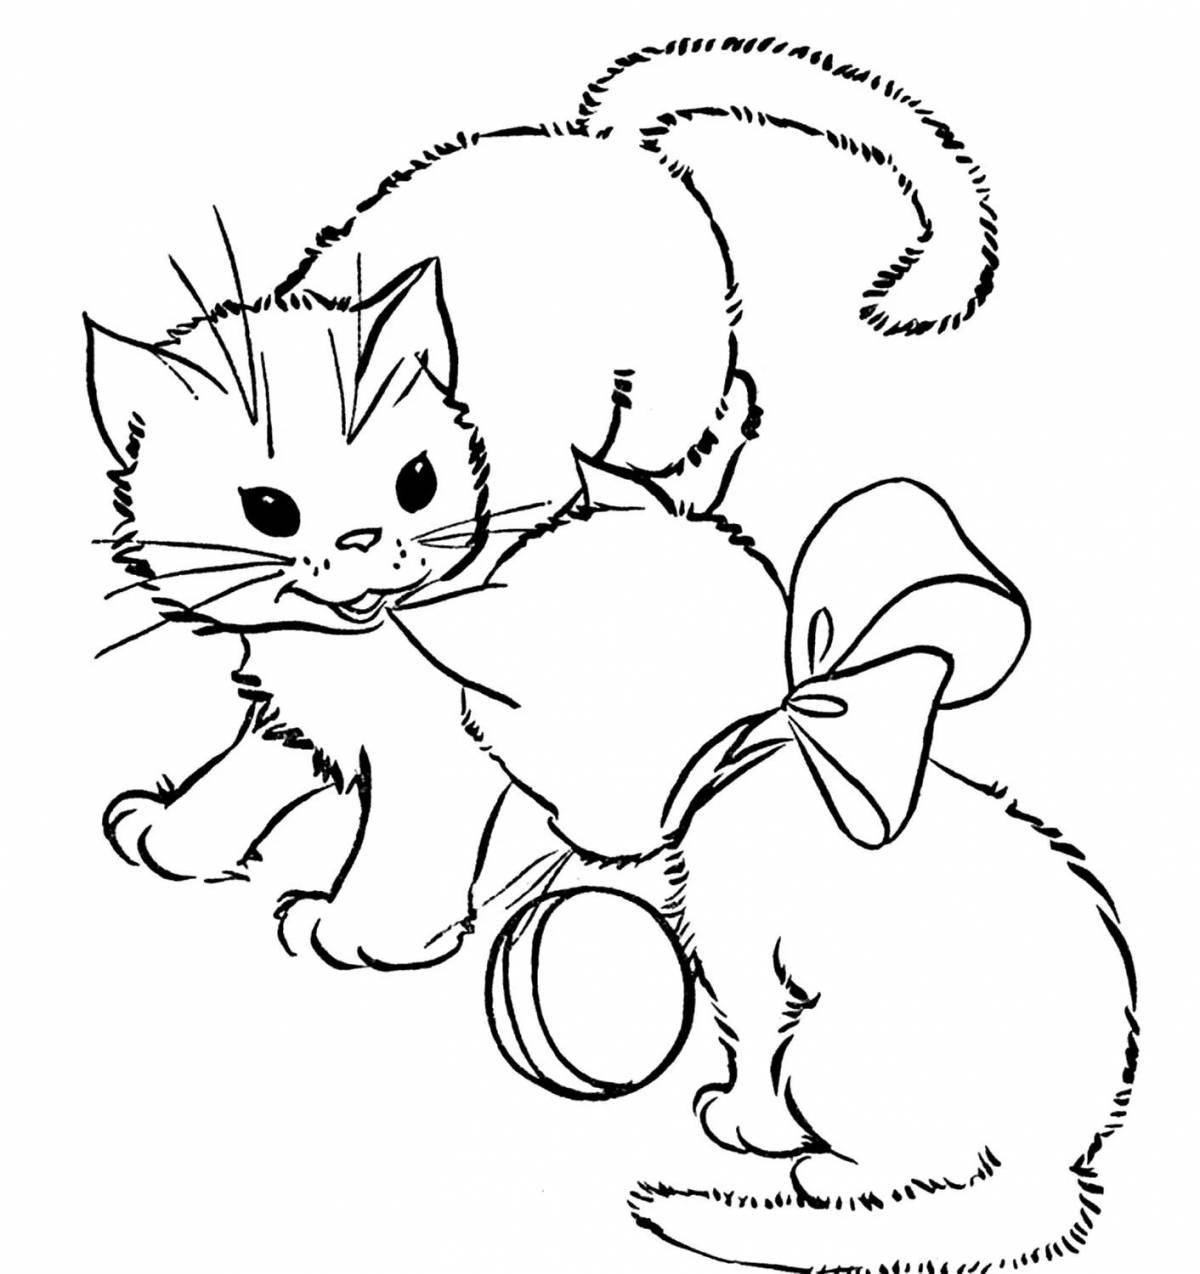 Colorful kitten coloring book for children 5-6 years old